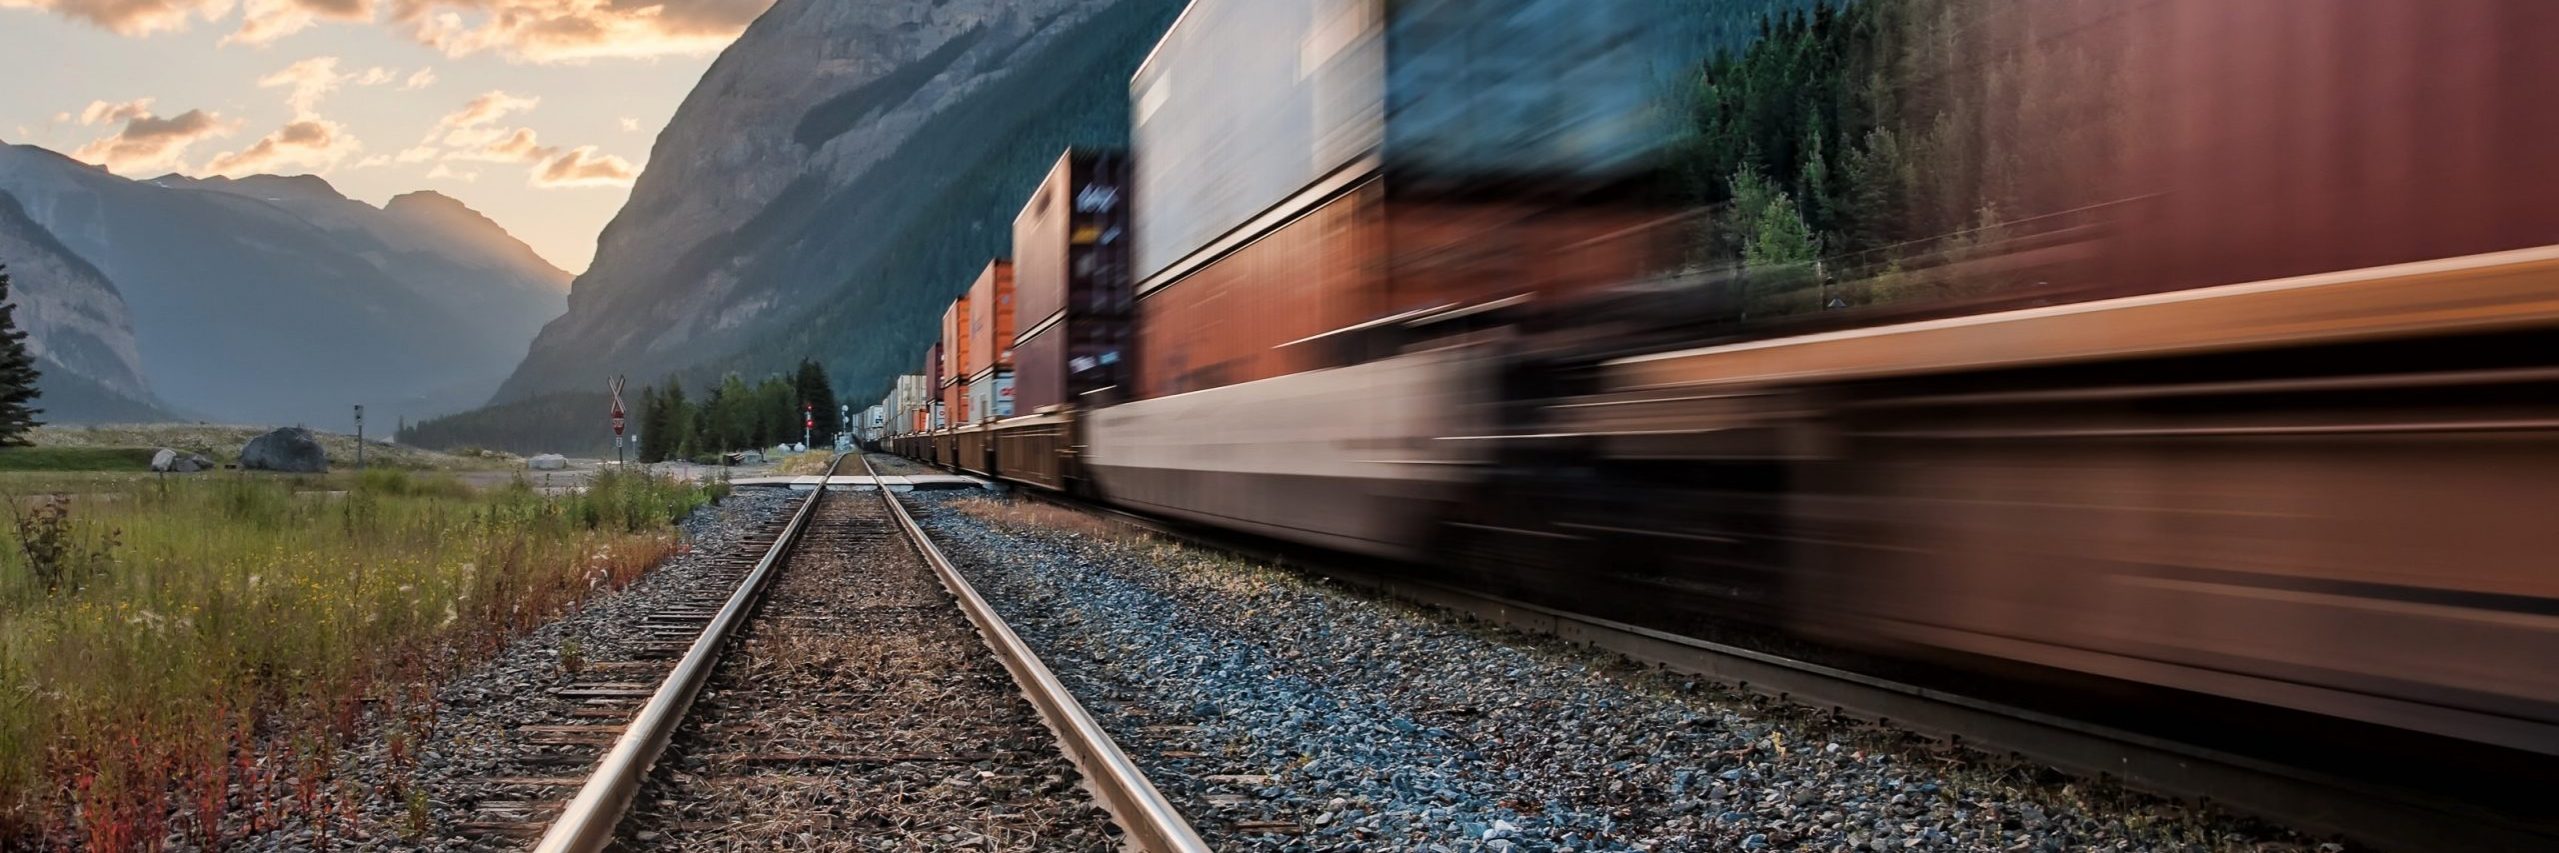 Freight train passing on tracks